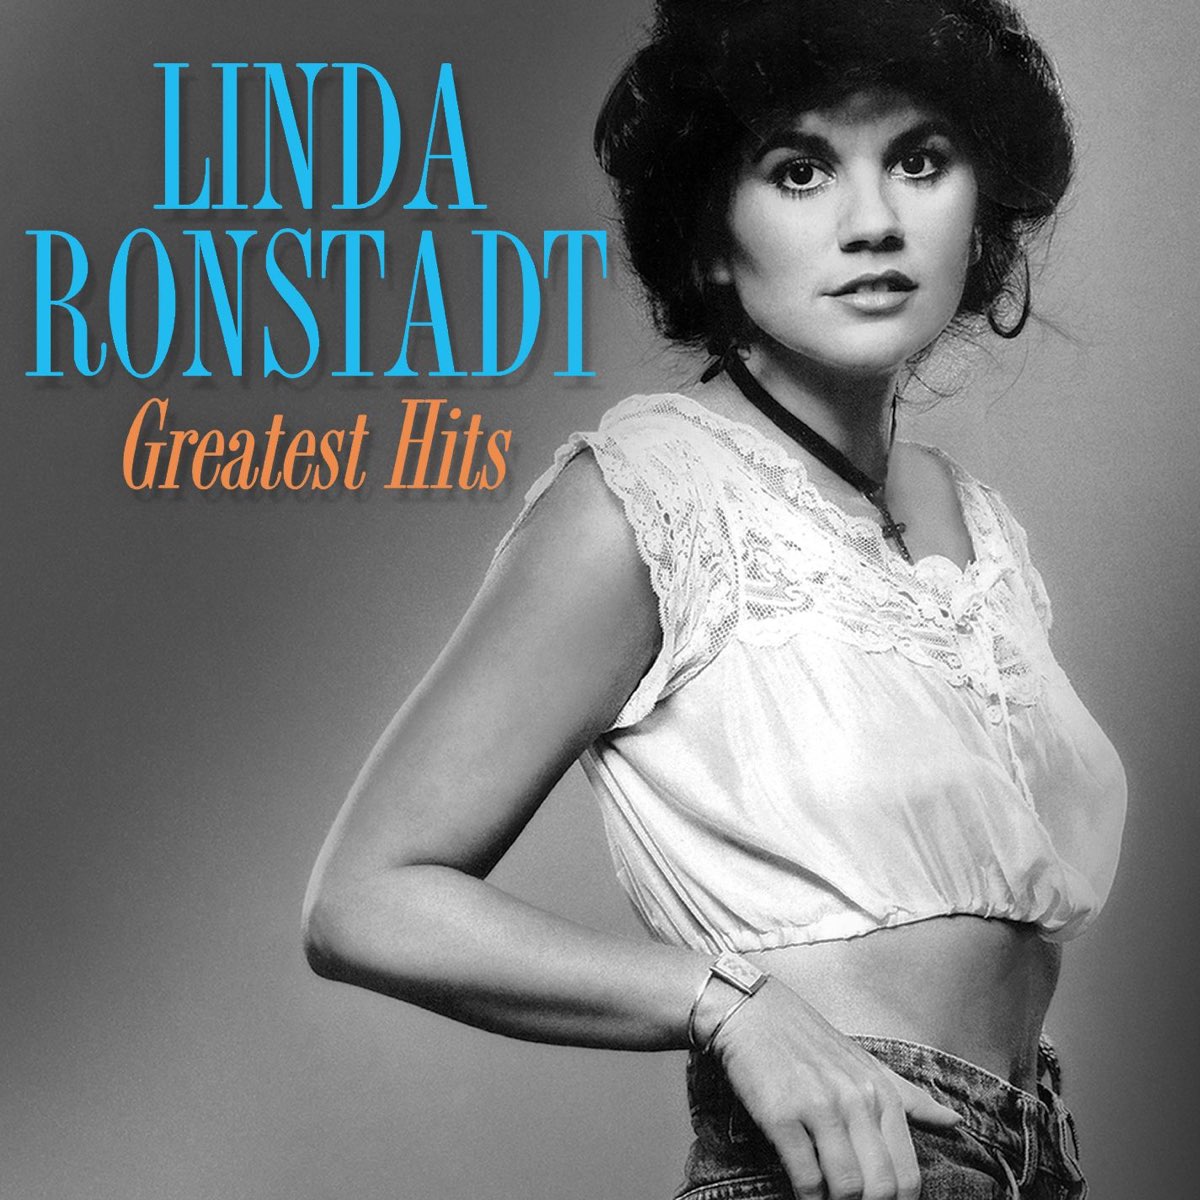 ‎Greatest Hits (2015) [Remastered] by Linda Ronstadt on Apple Music